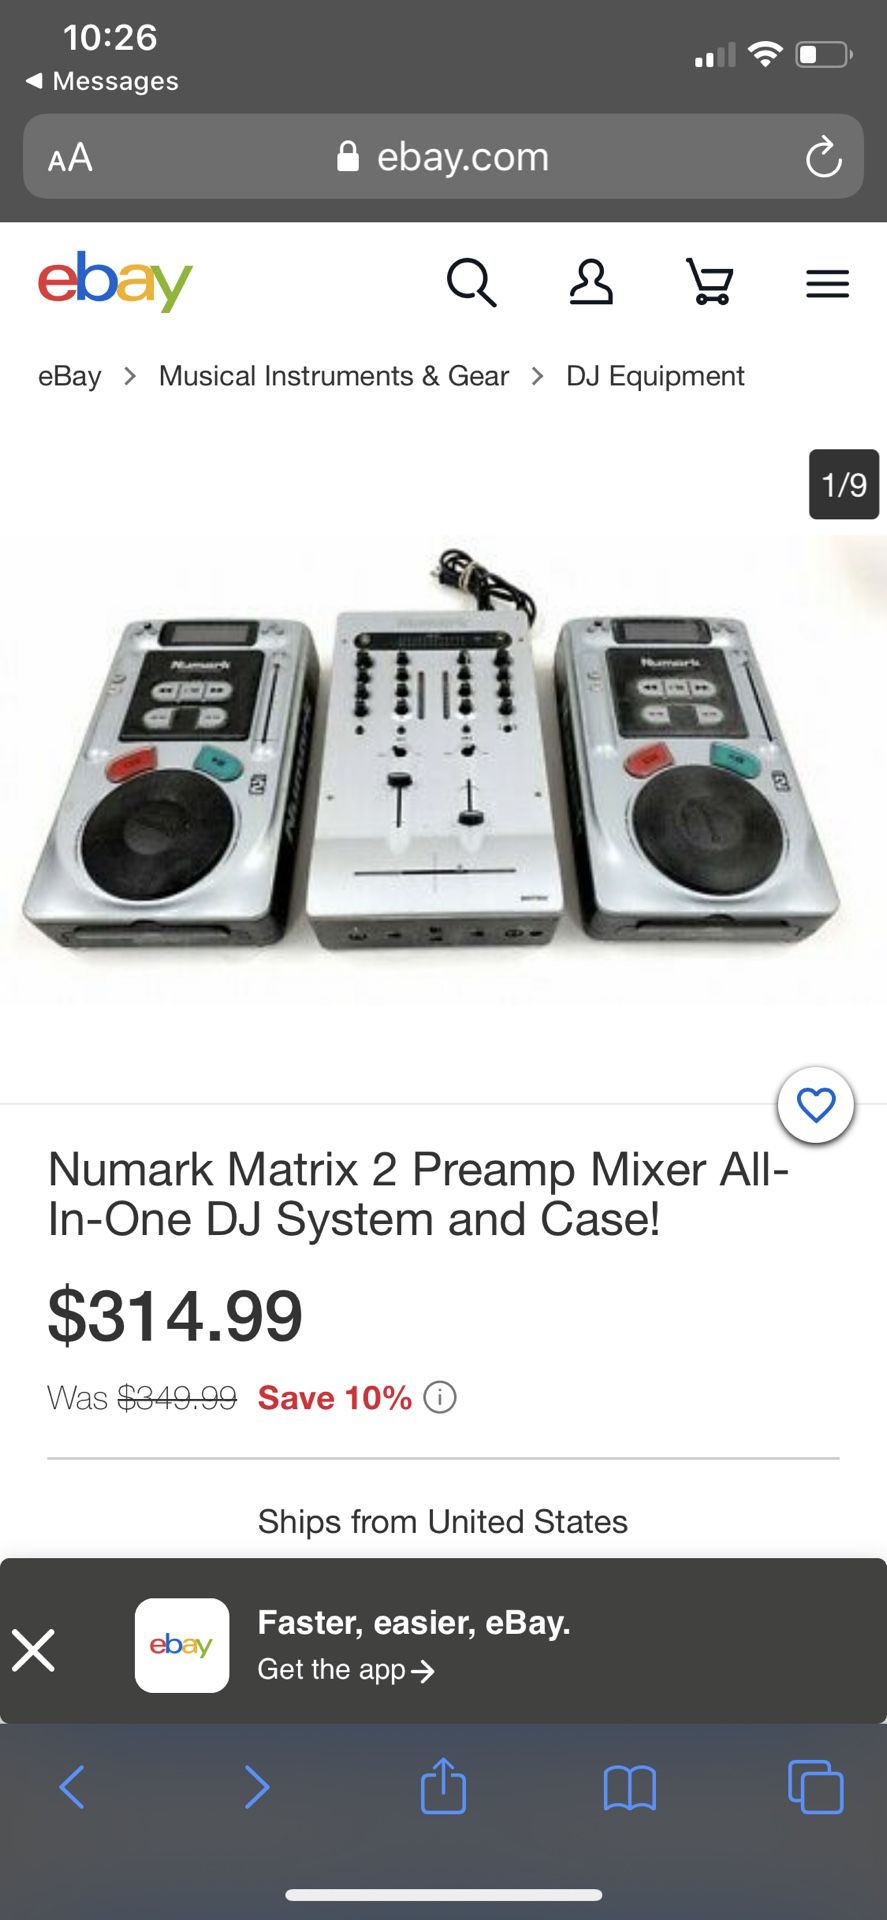 Numark Matrix 2 Preamp Mixer All-In-One DJ System and Case